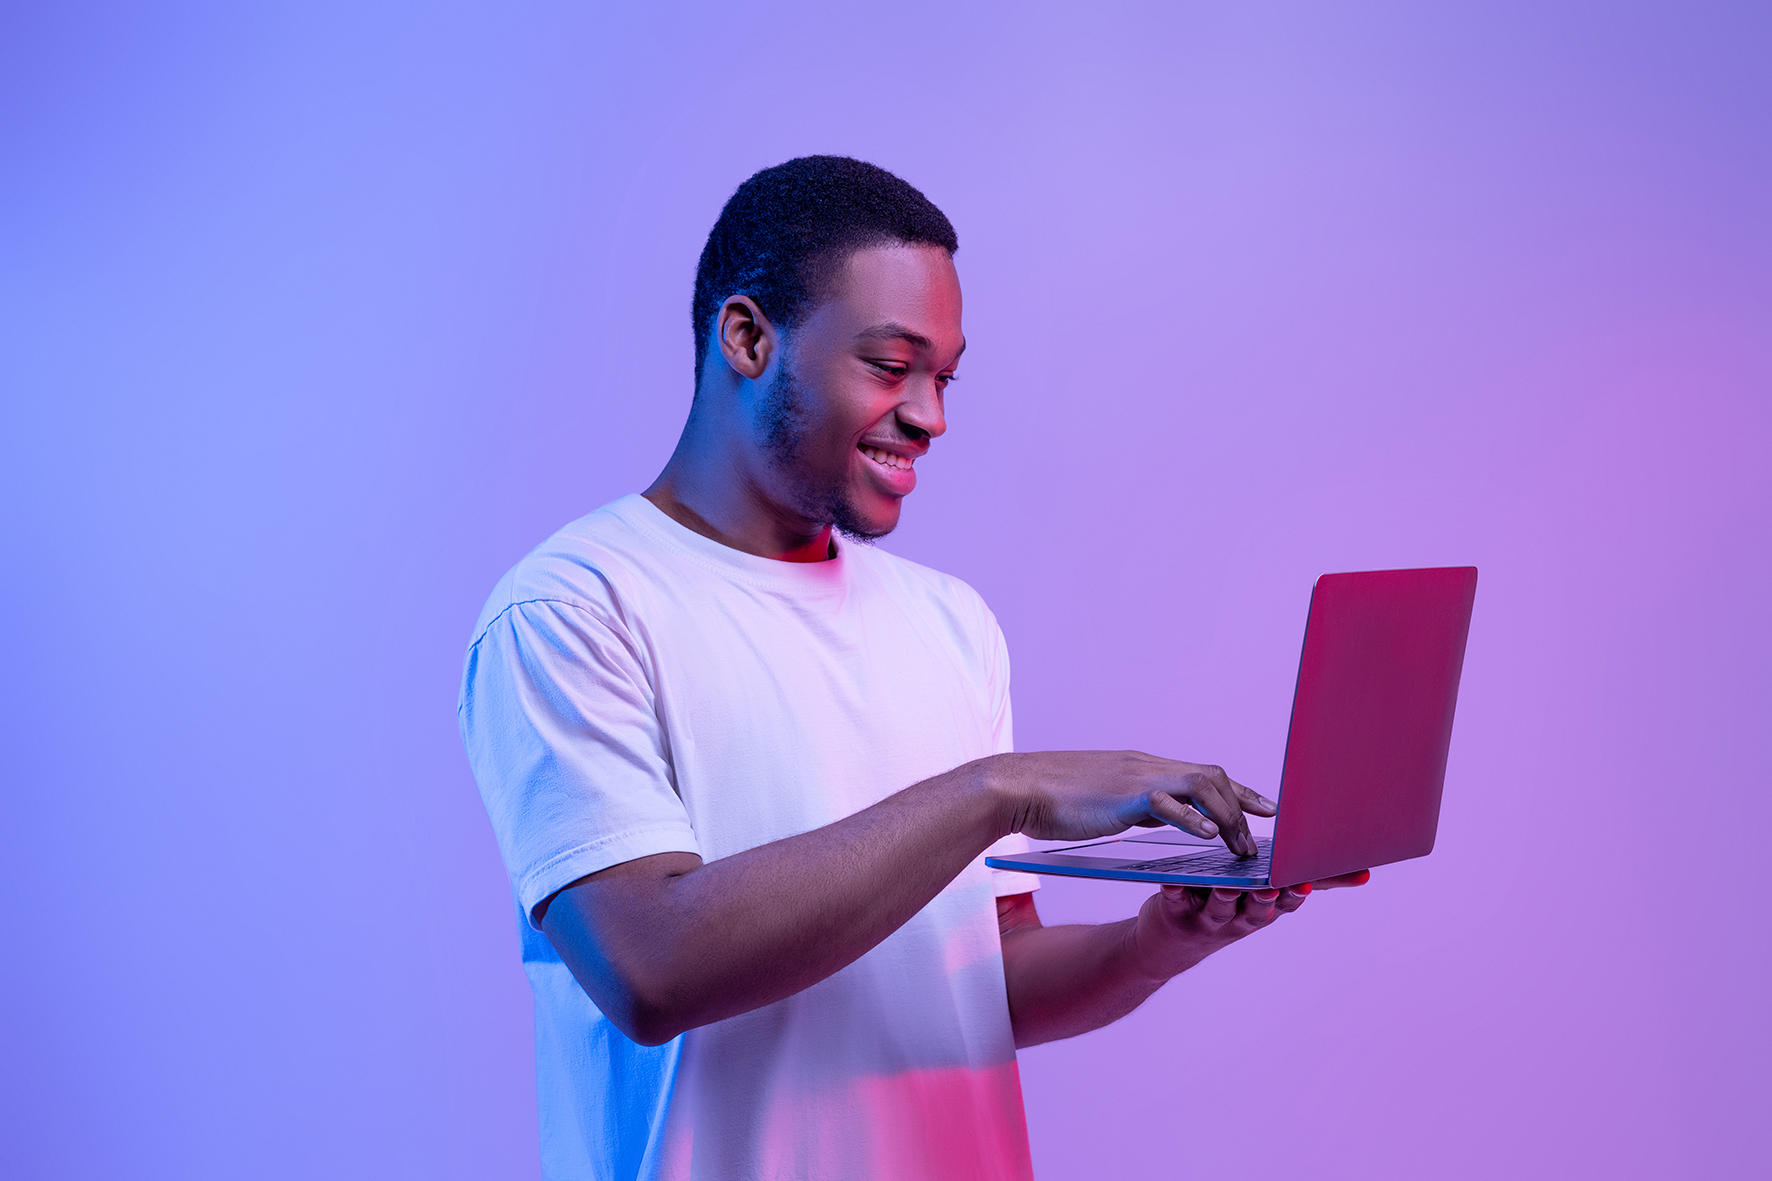 Man standing, smiling and typing on laptop. Purple background light.